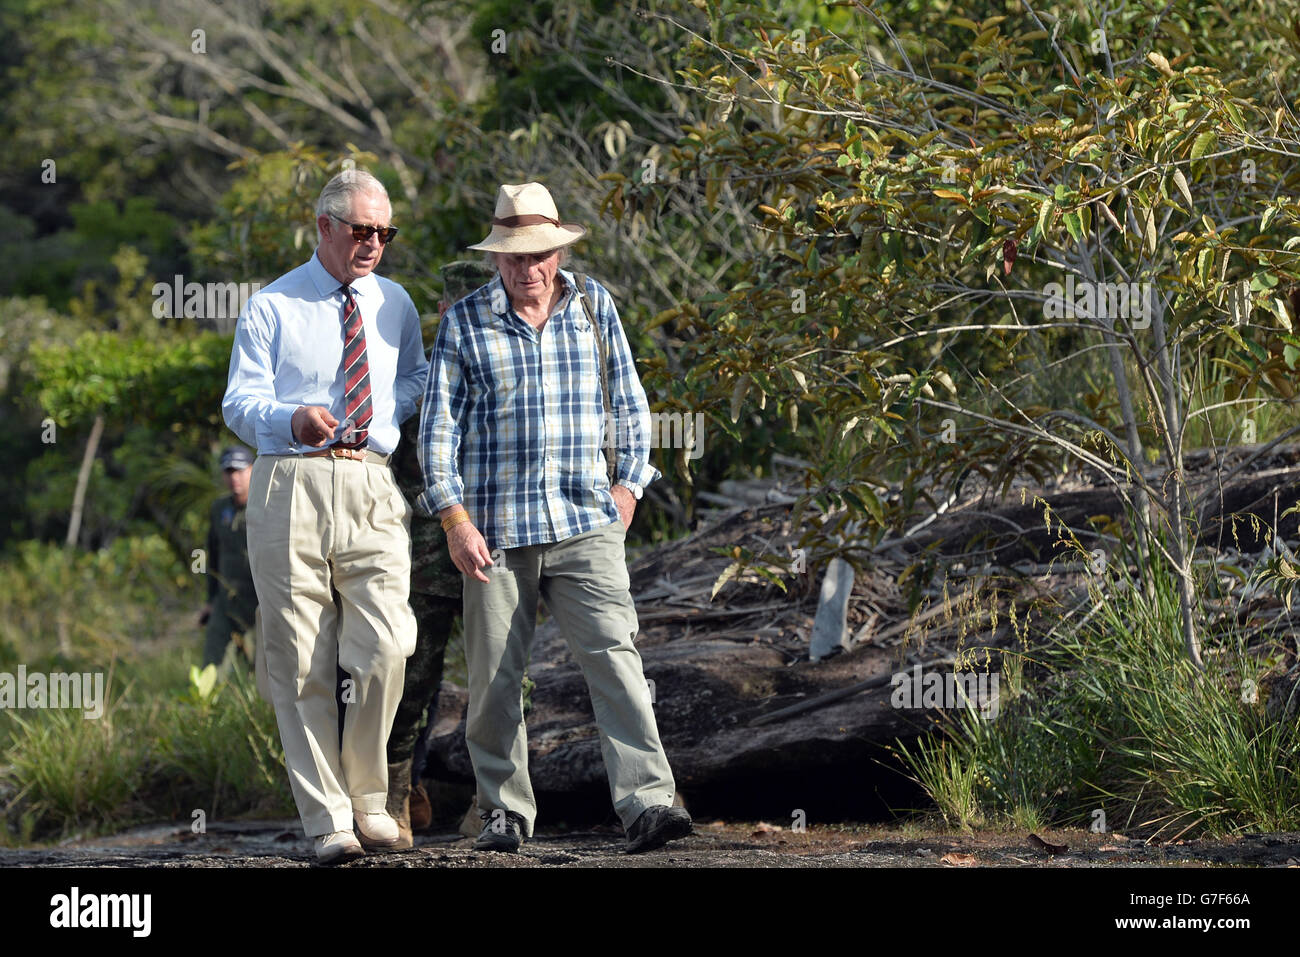 The Prince of Wales and Martin Von-Hildebrand have a walking tour of Cano Cristales, La Macarena in Colombia, on the third day of the Prince of Wales and Duchess of Cornwall's tour to Colombia and Mexico. Stock Photo